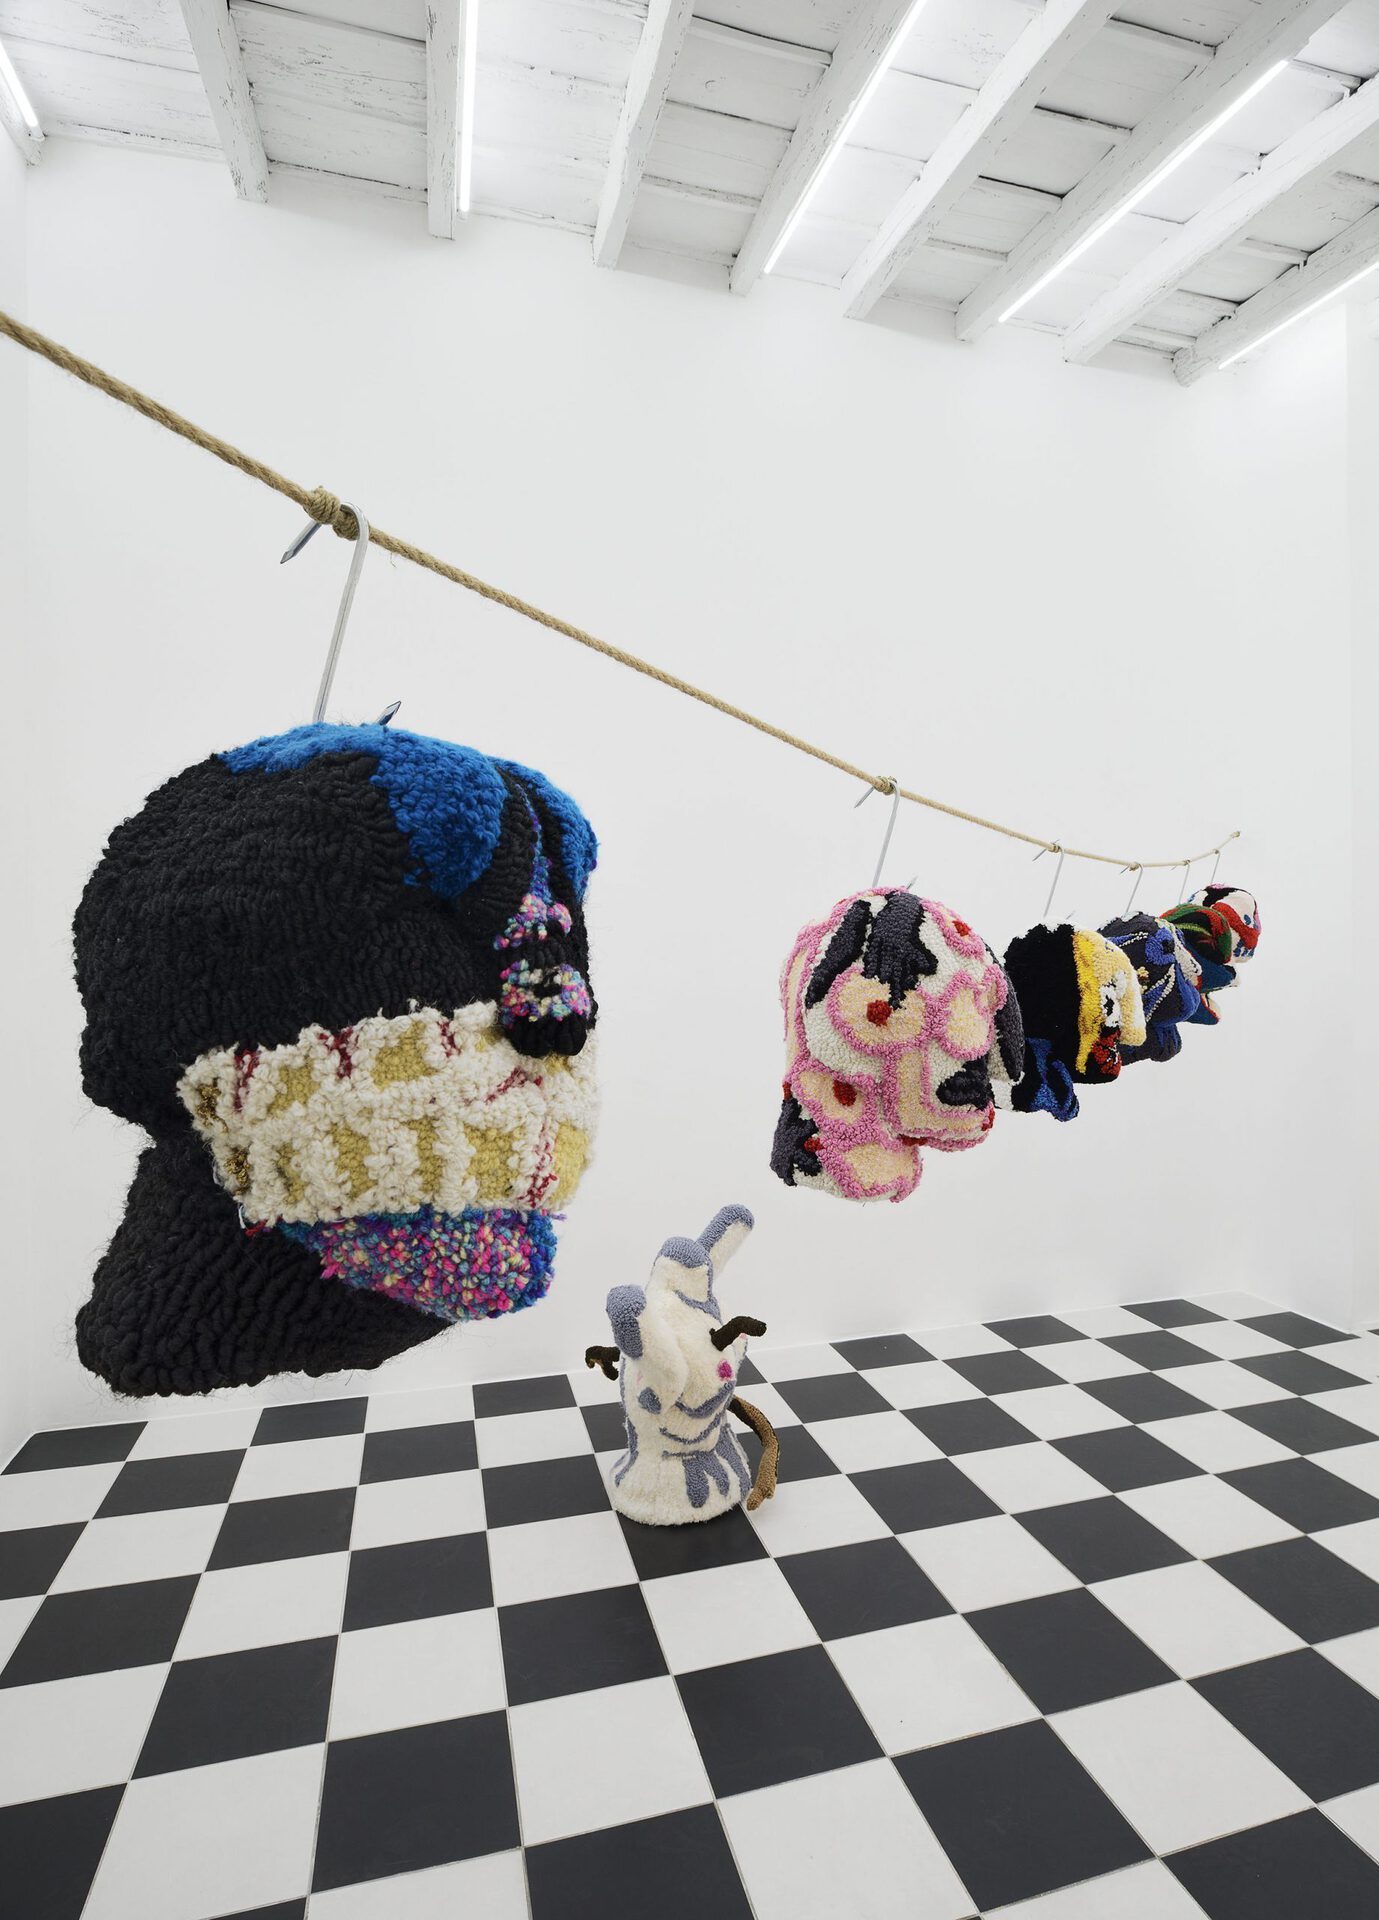 05. Anna Perach, Seven Wives, 2020, tufted yarn, artificial hair, metal hooks, hemp rope, size varies, Courtesy of ADA, Rome